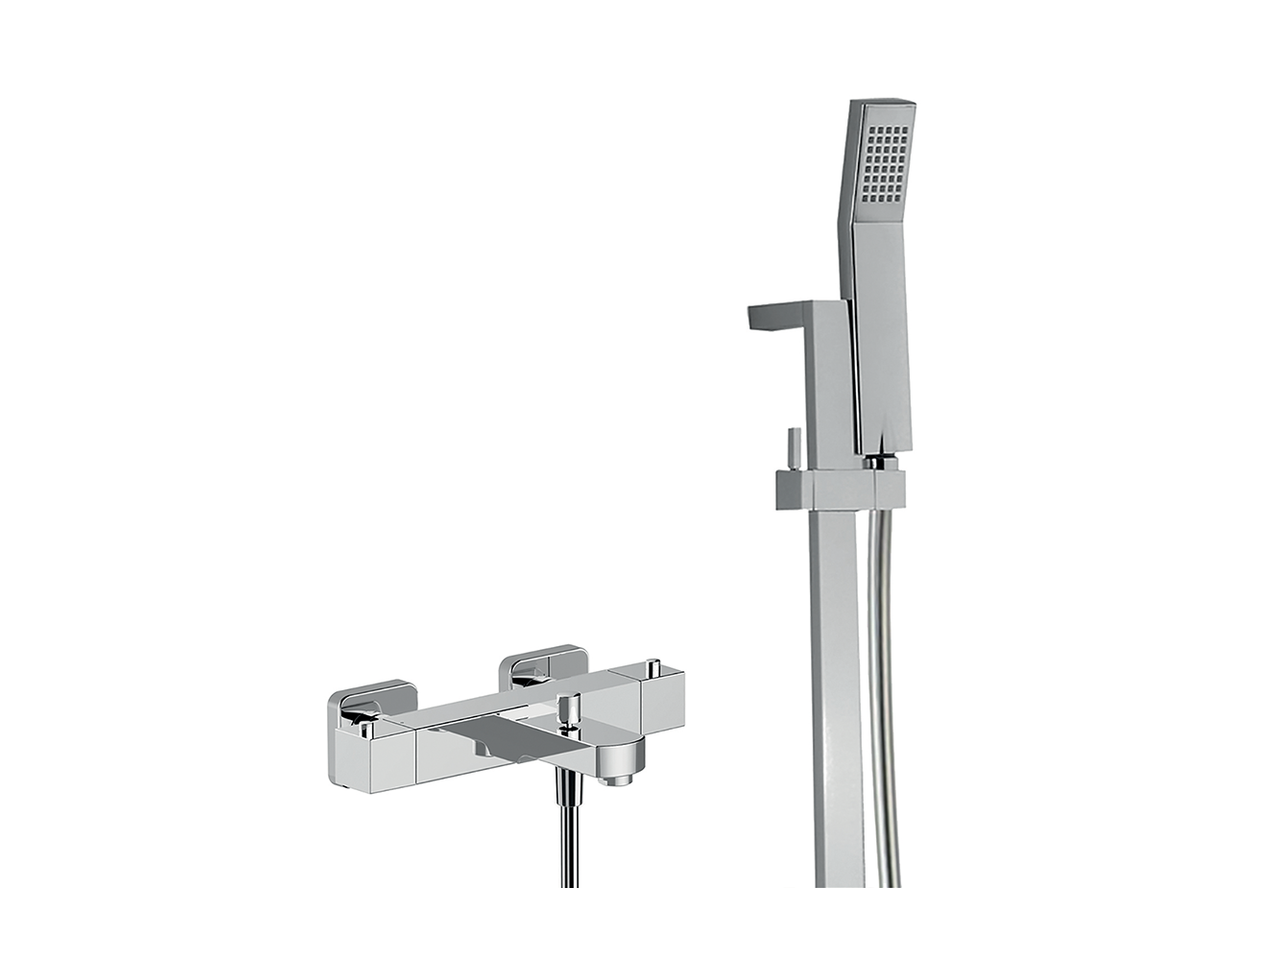 CisalThermostatic bath-shower mixer with sliding bar ROADSTER ACCENT_RAS27010